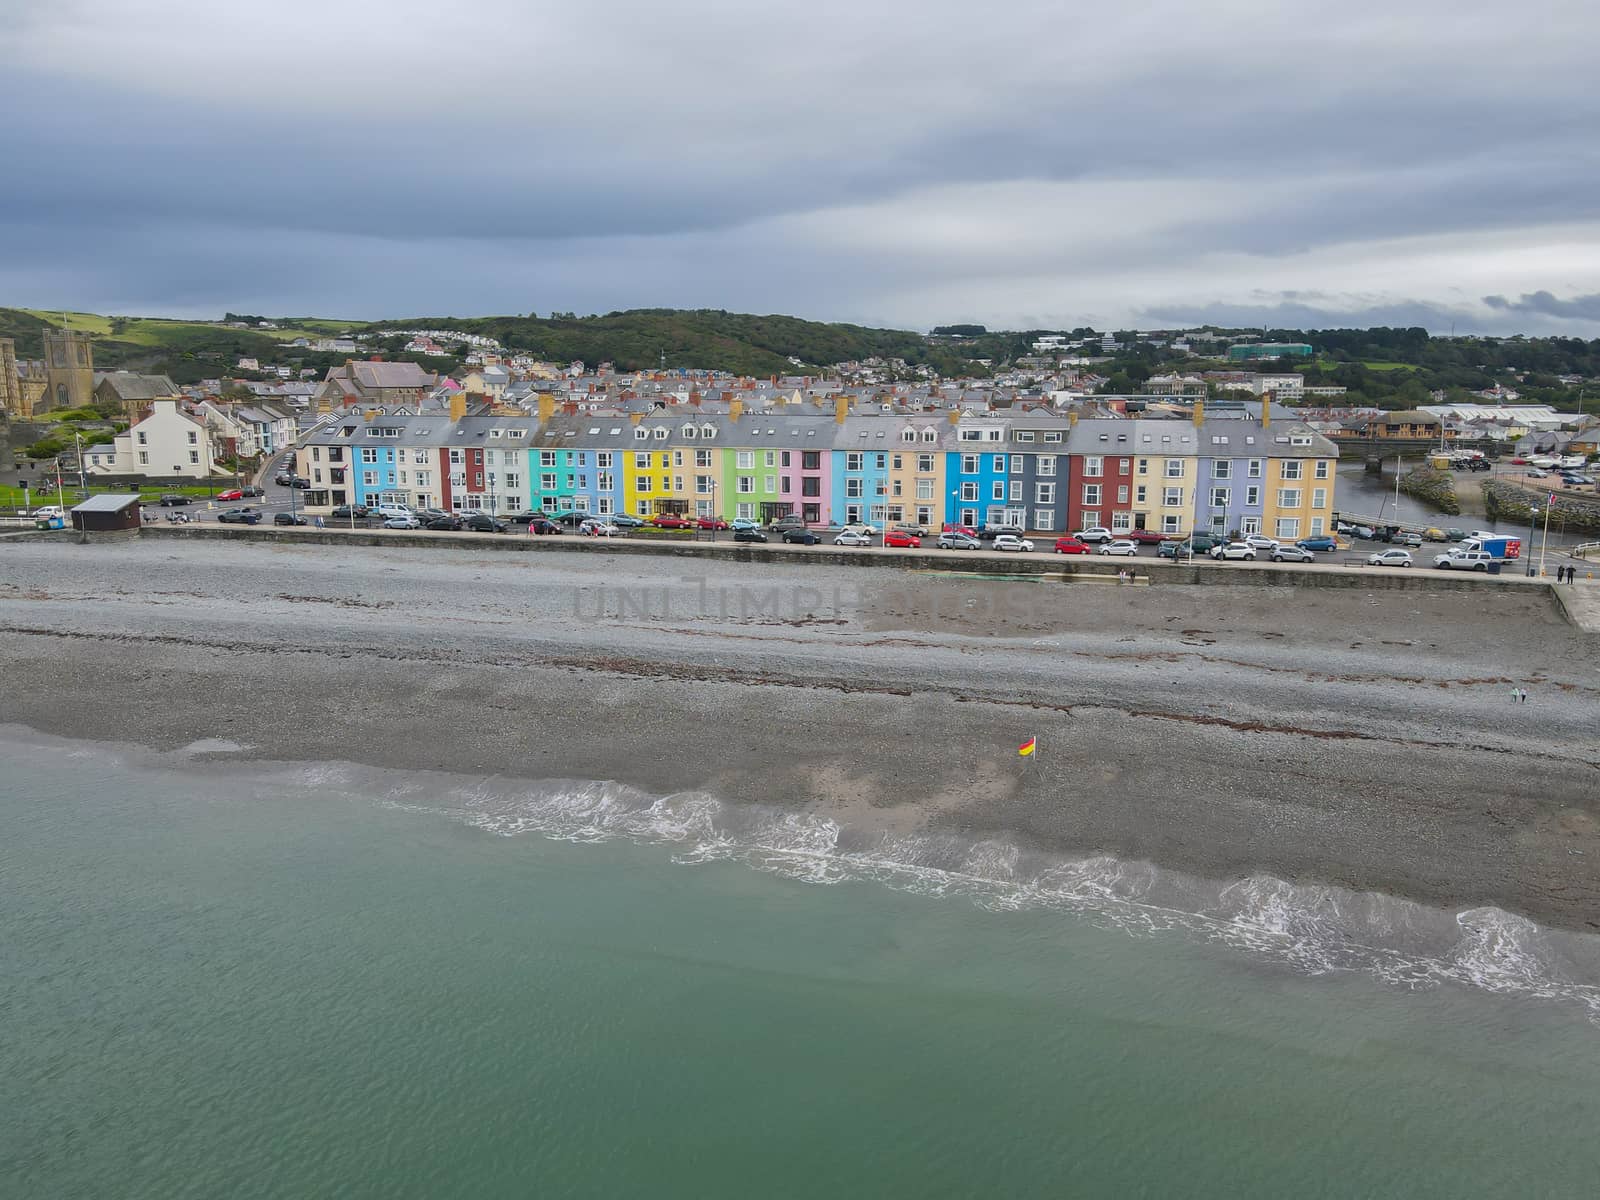 Colourful homes at the South Beach Promenade in Aberystwyth, Ceredigion, Wales, UK. These houses have a great coastal view of the Irish Sea